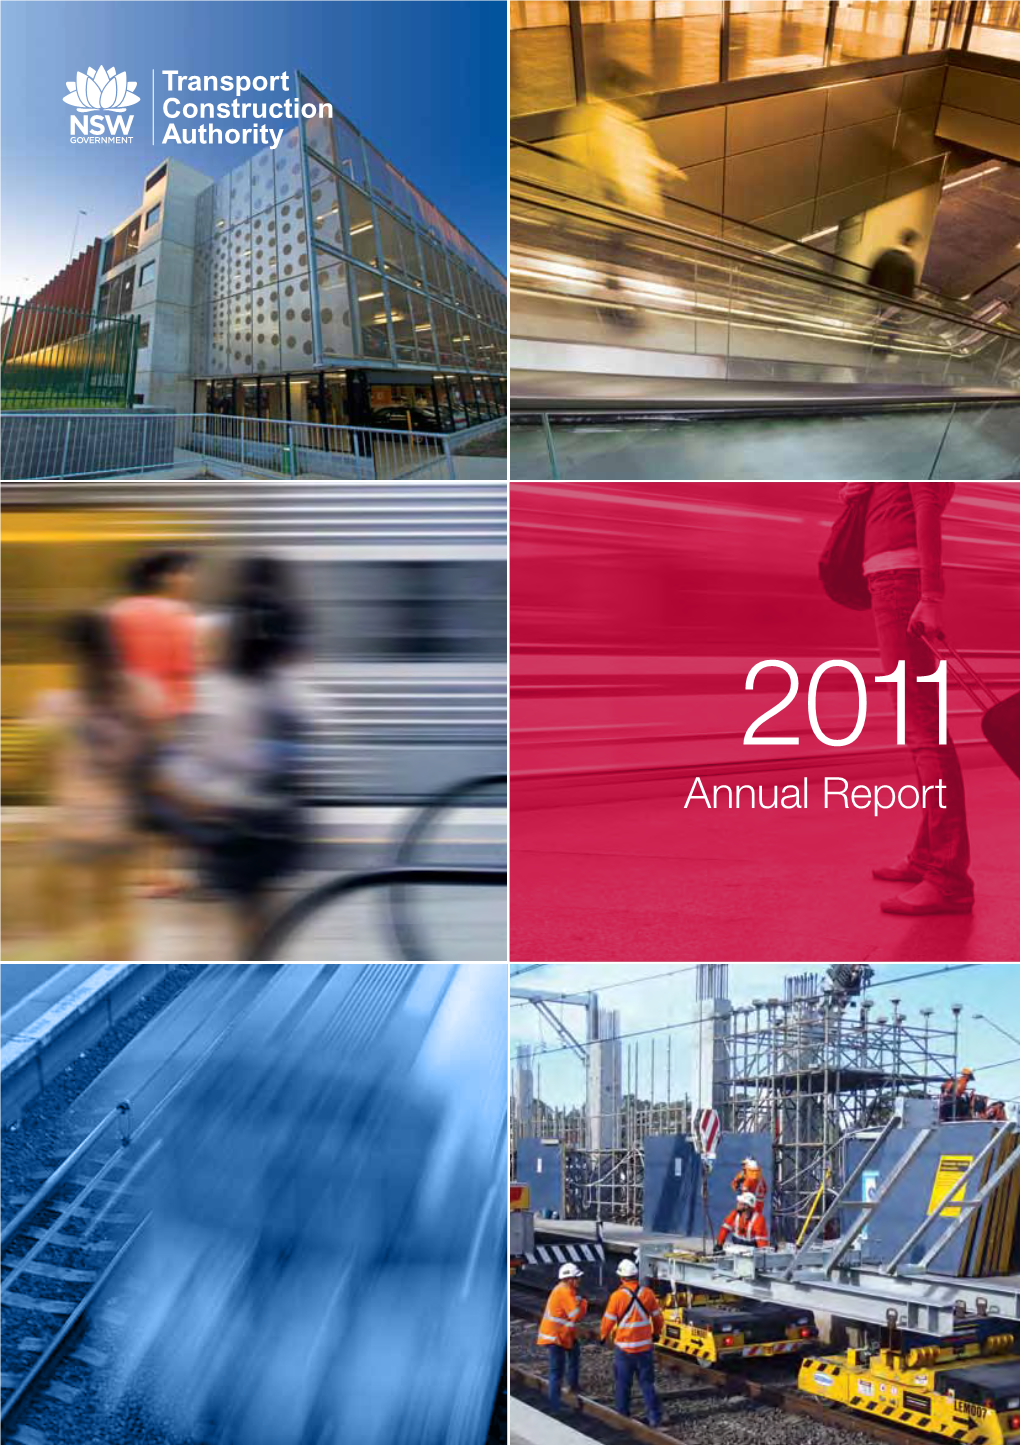 Transport Construction Authority Annual Report 2011